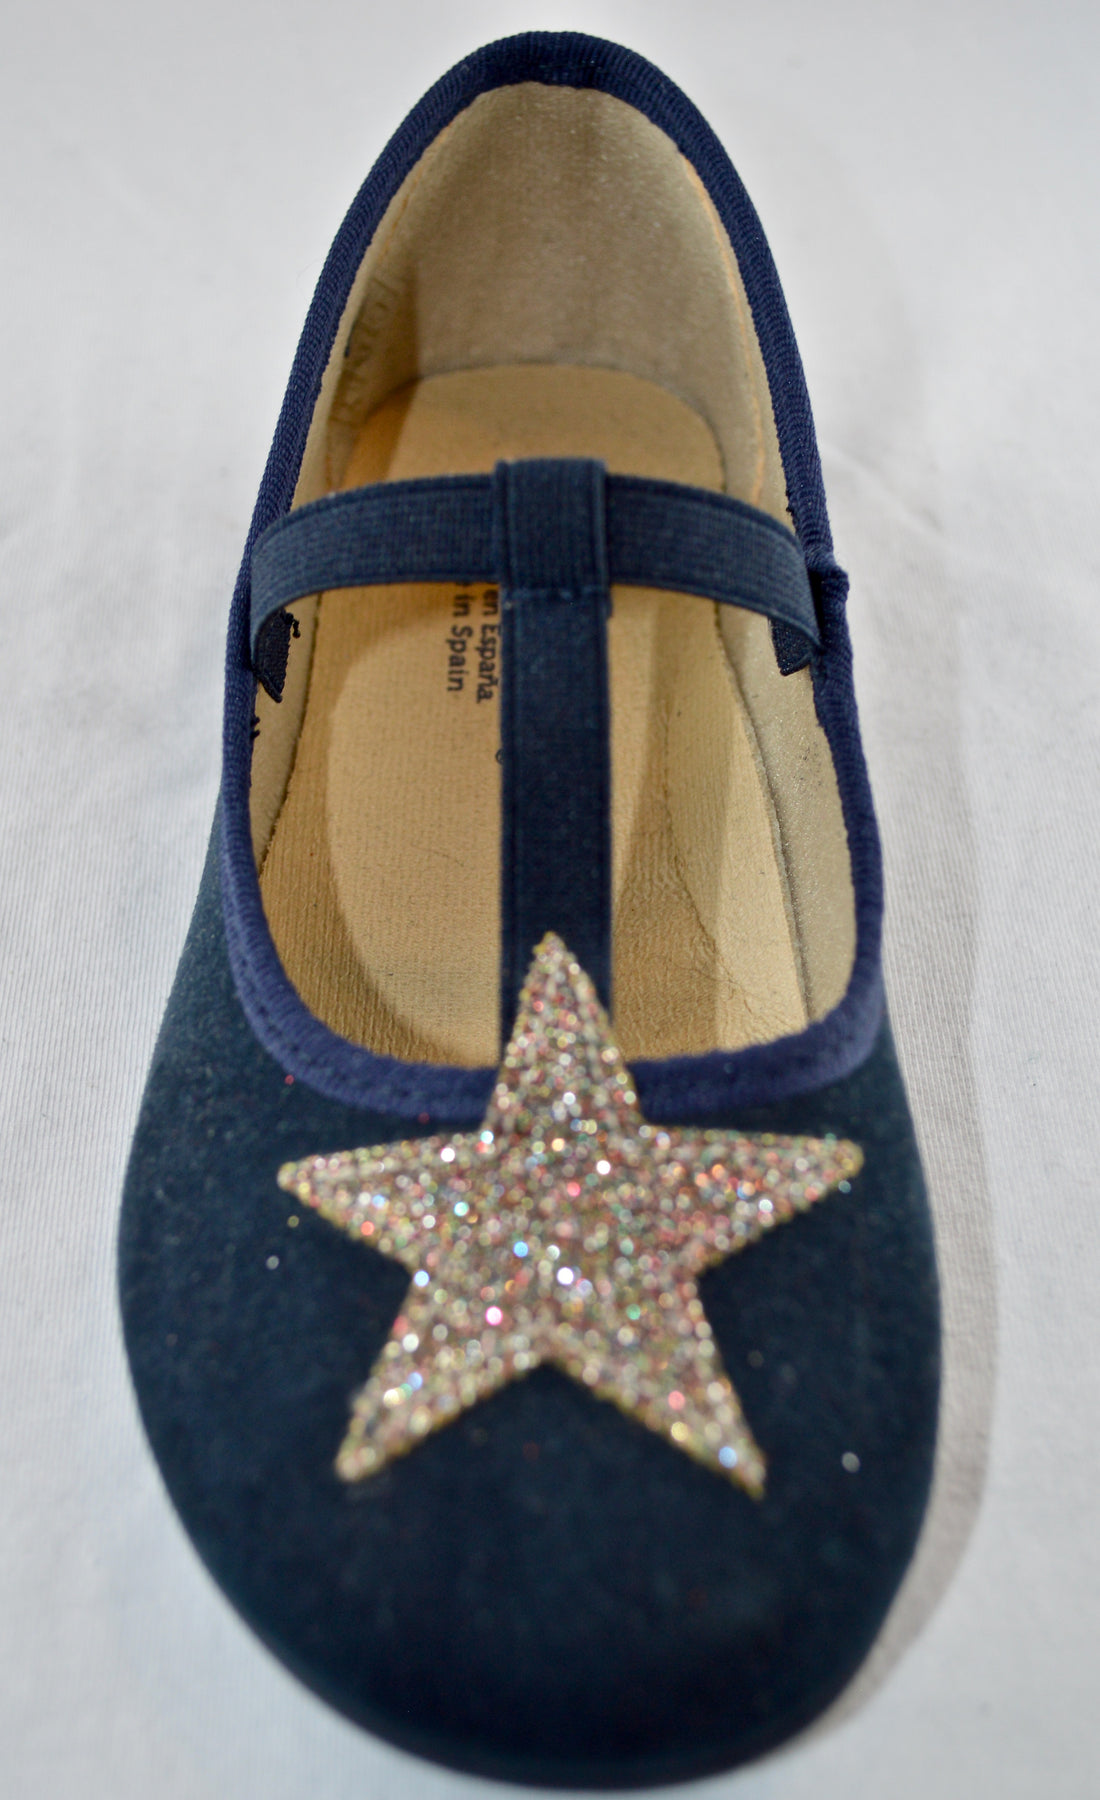 BATILAS ballet flats in blue or gray leather with star